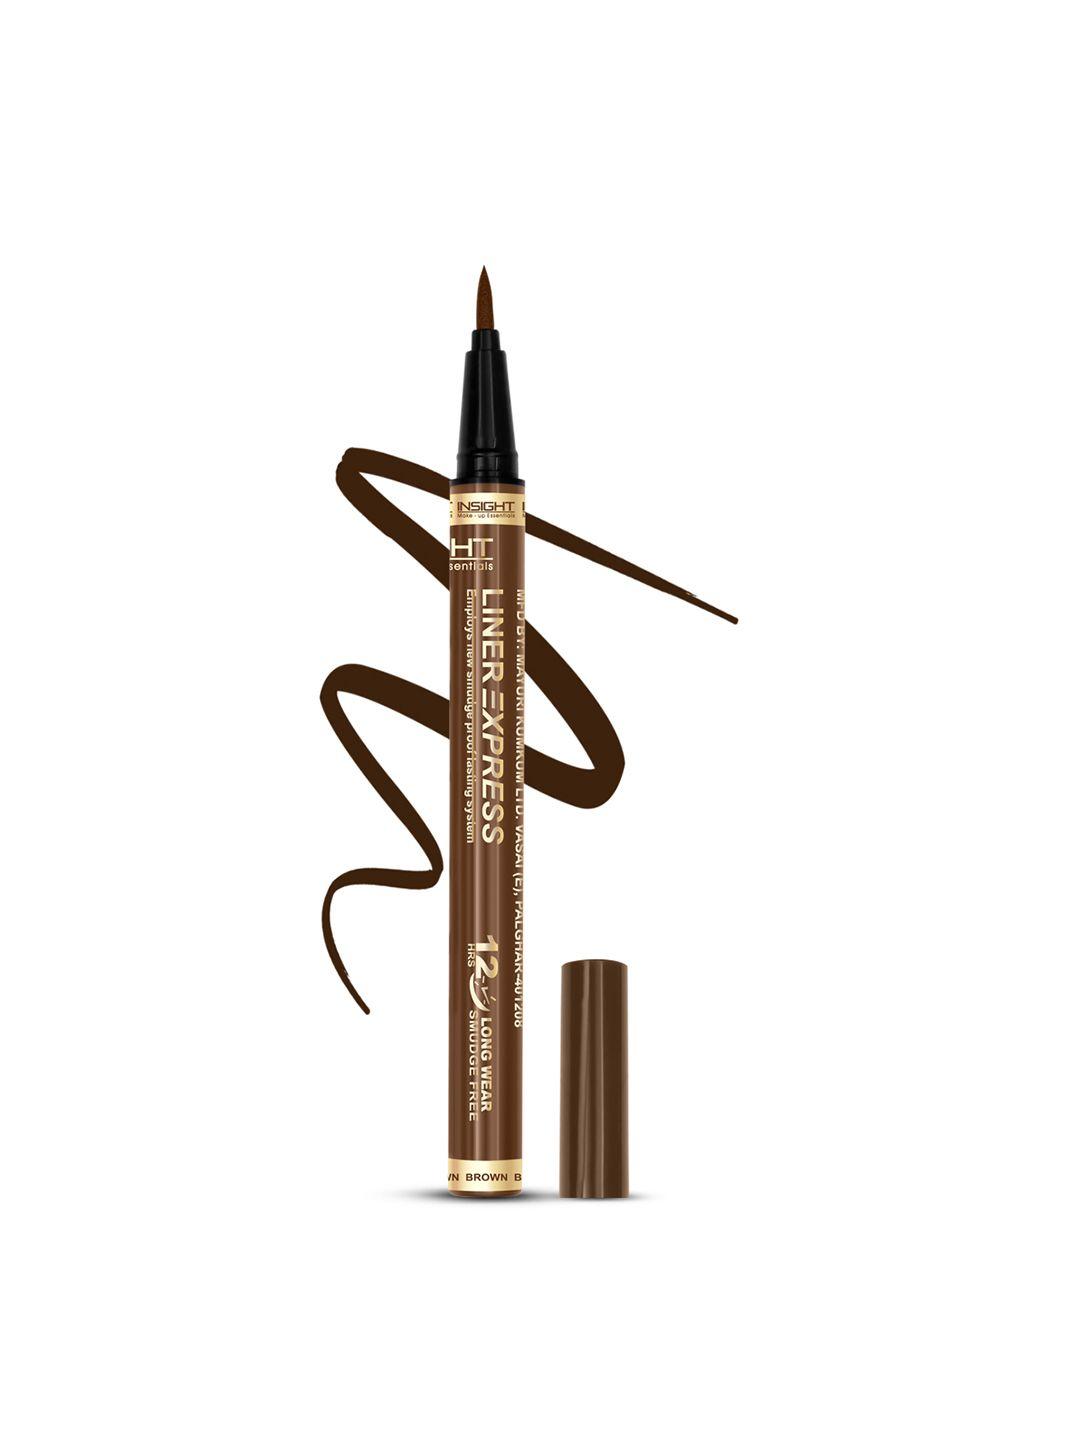 insight cosmetics liner express long-wear smudge-free eyeliner pen - brown